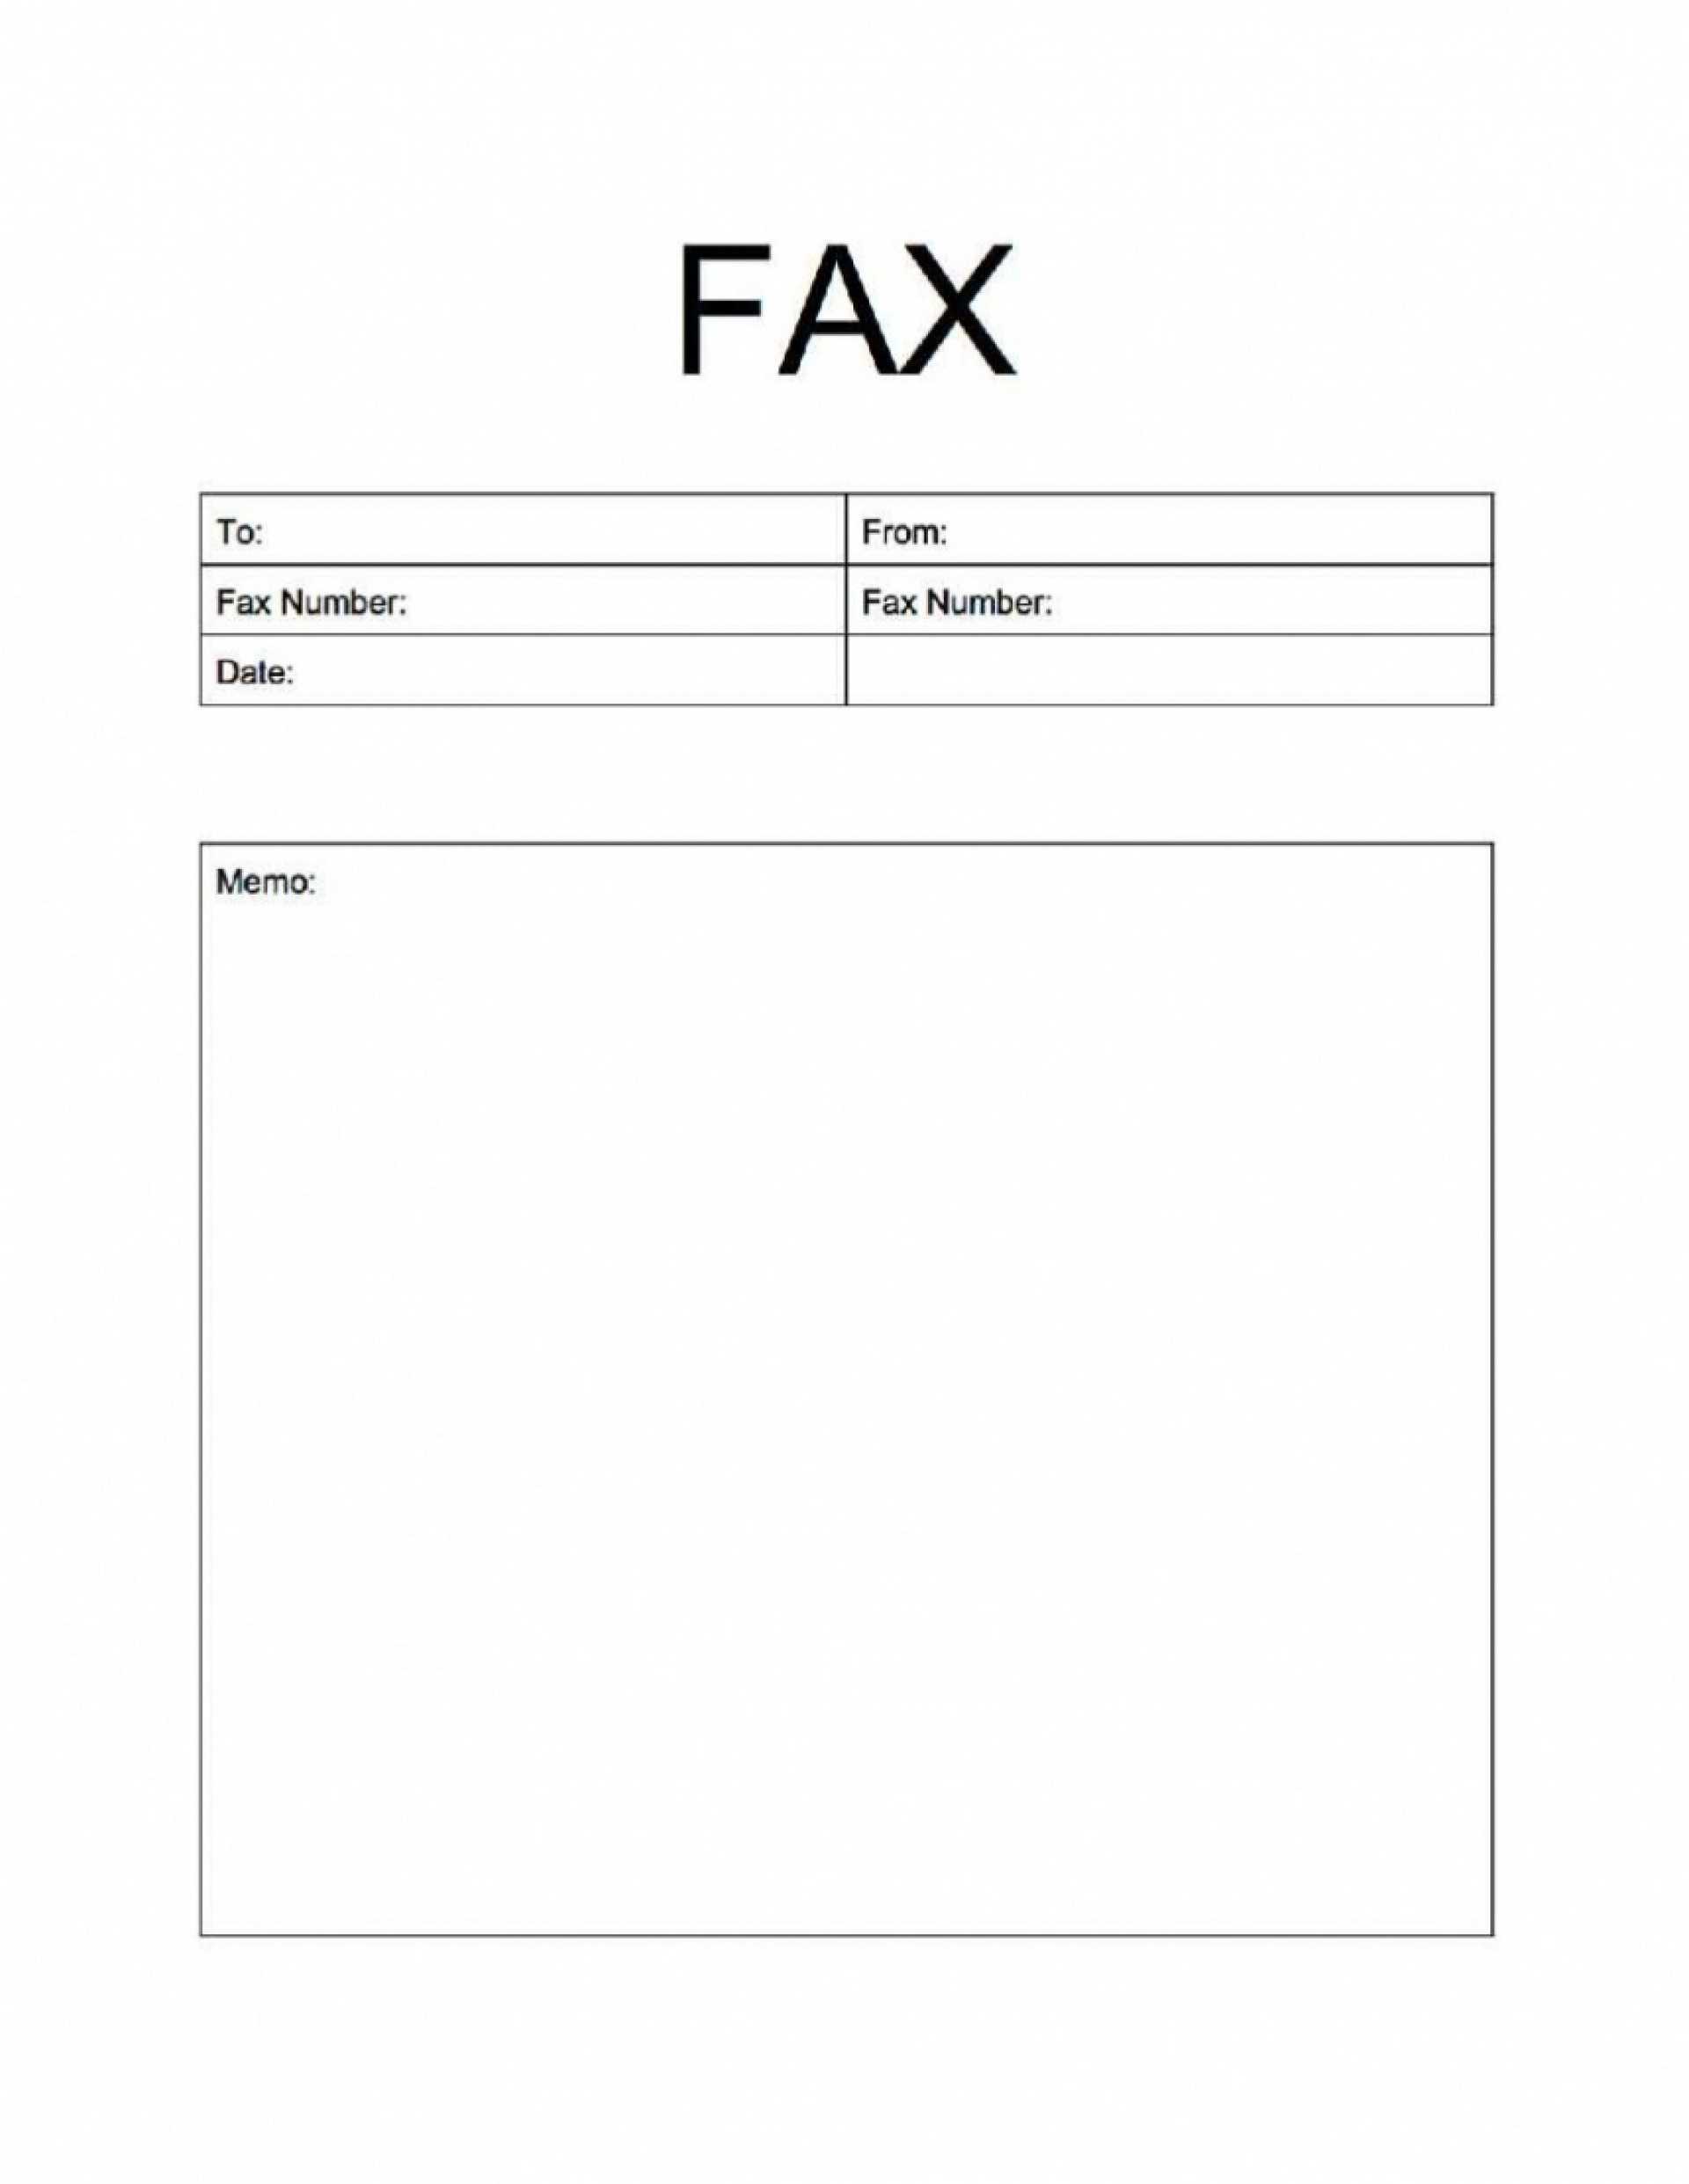 Basic Fax Cover Sheet Template Word 2016 Pdf Free Pertaining To Fax Cover Sheet Template Word 2010